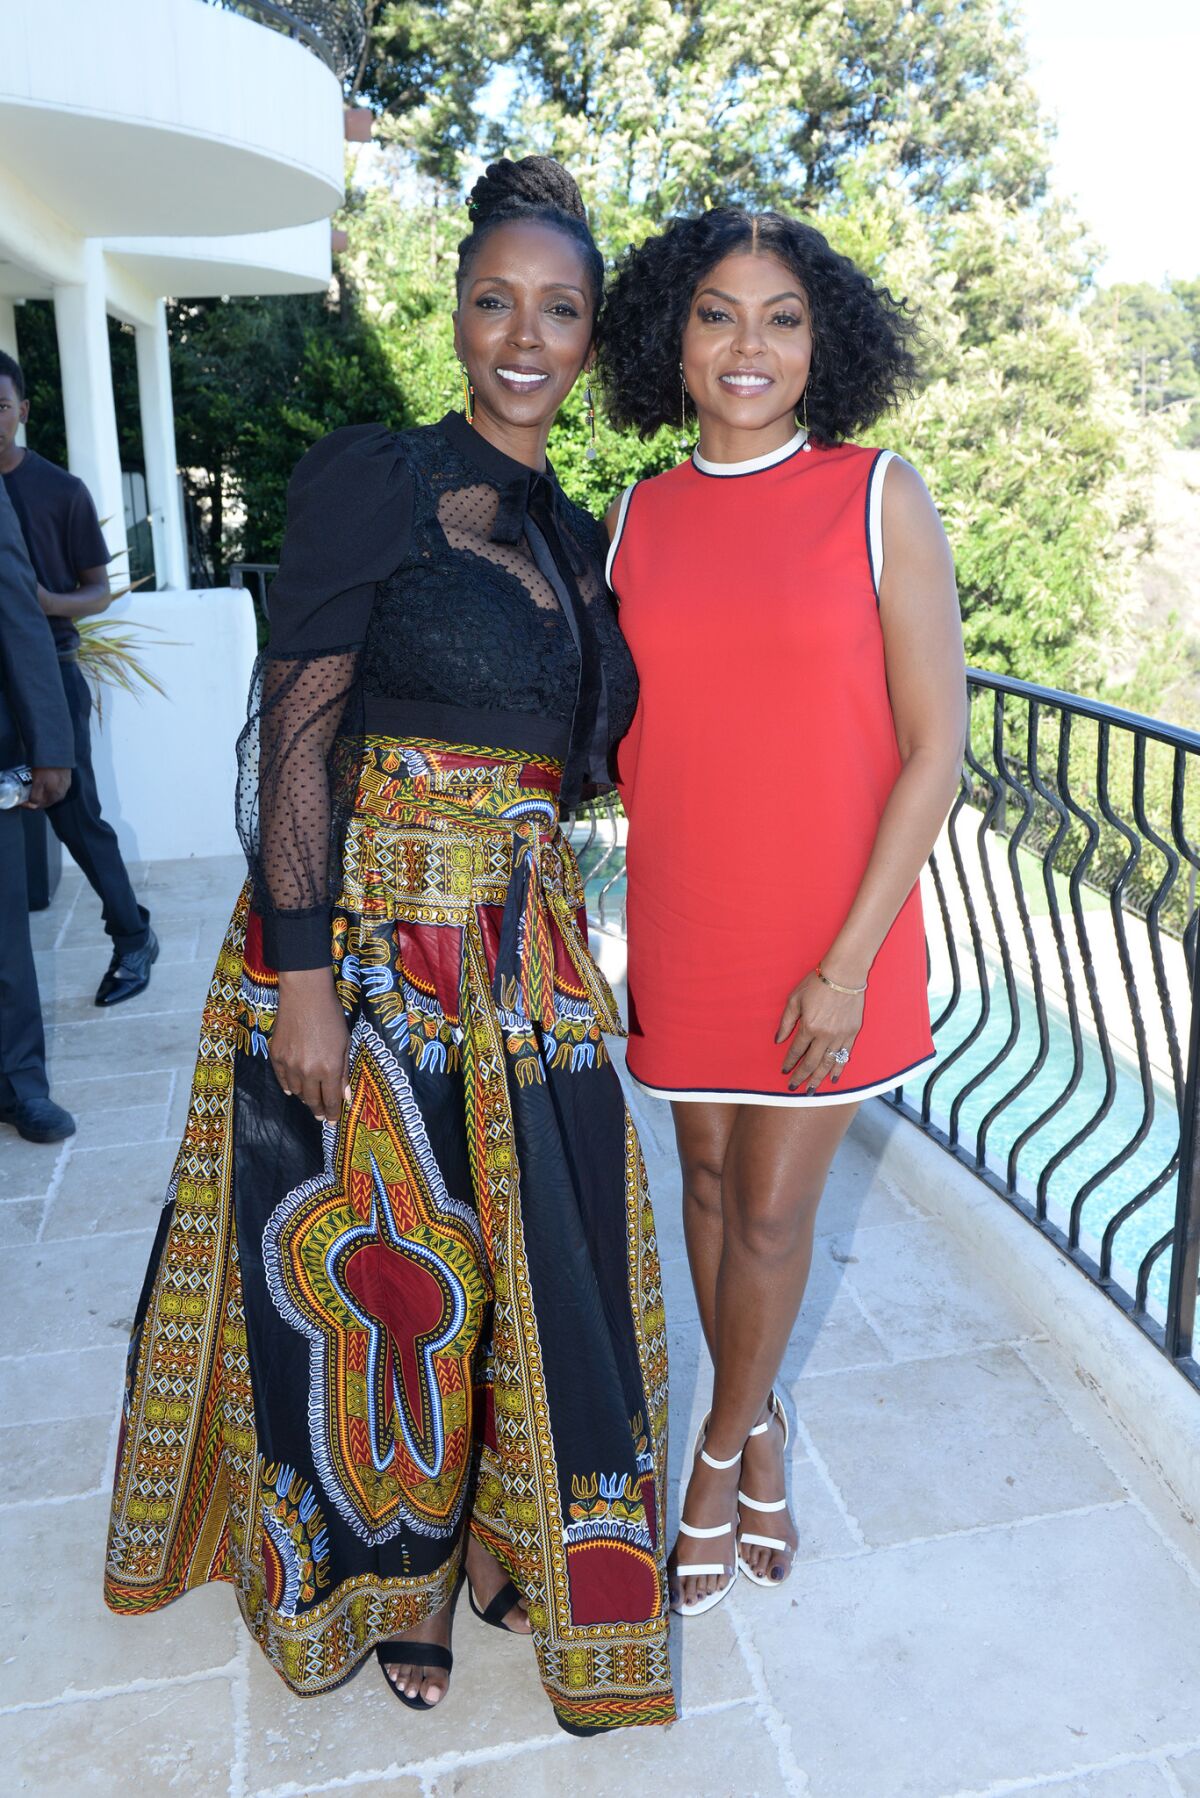 Tracie Jade Jenkins, left, with Taraji P. Henson, who launched her new nonprofit organization, the Boris Lawrence Henson Foundation. The organization is named after the "Empire" actress' late father.